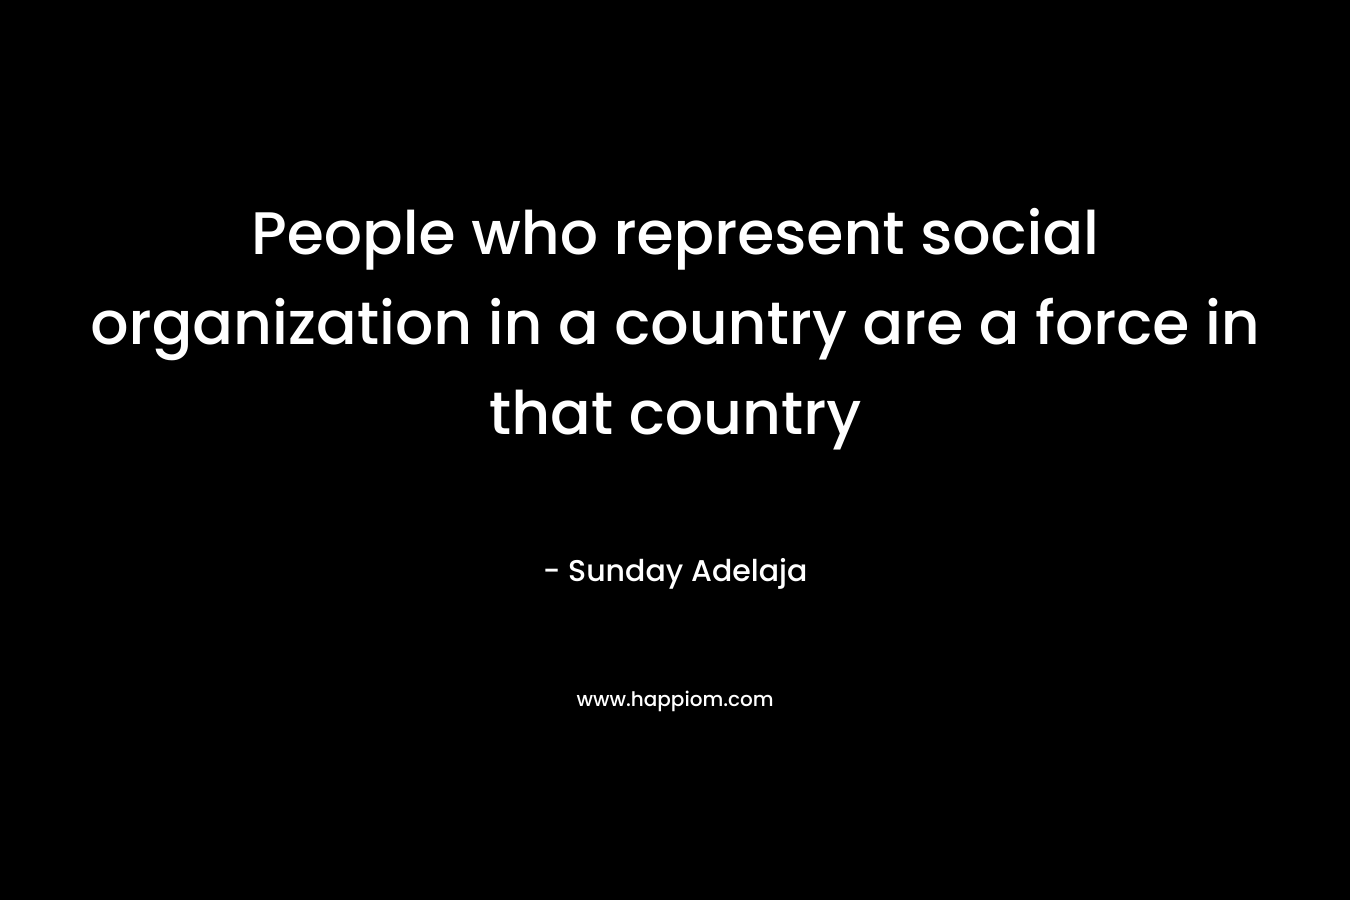 People who represent social organization in a country are a force in that country